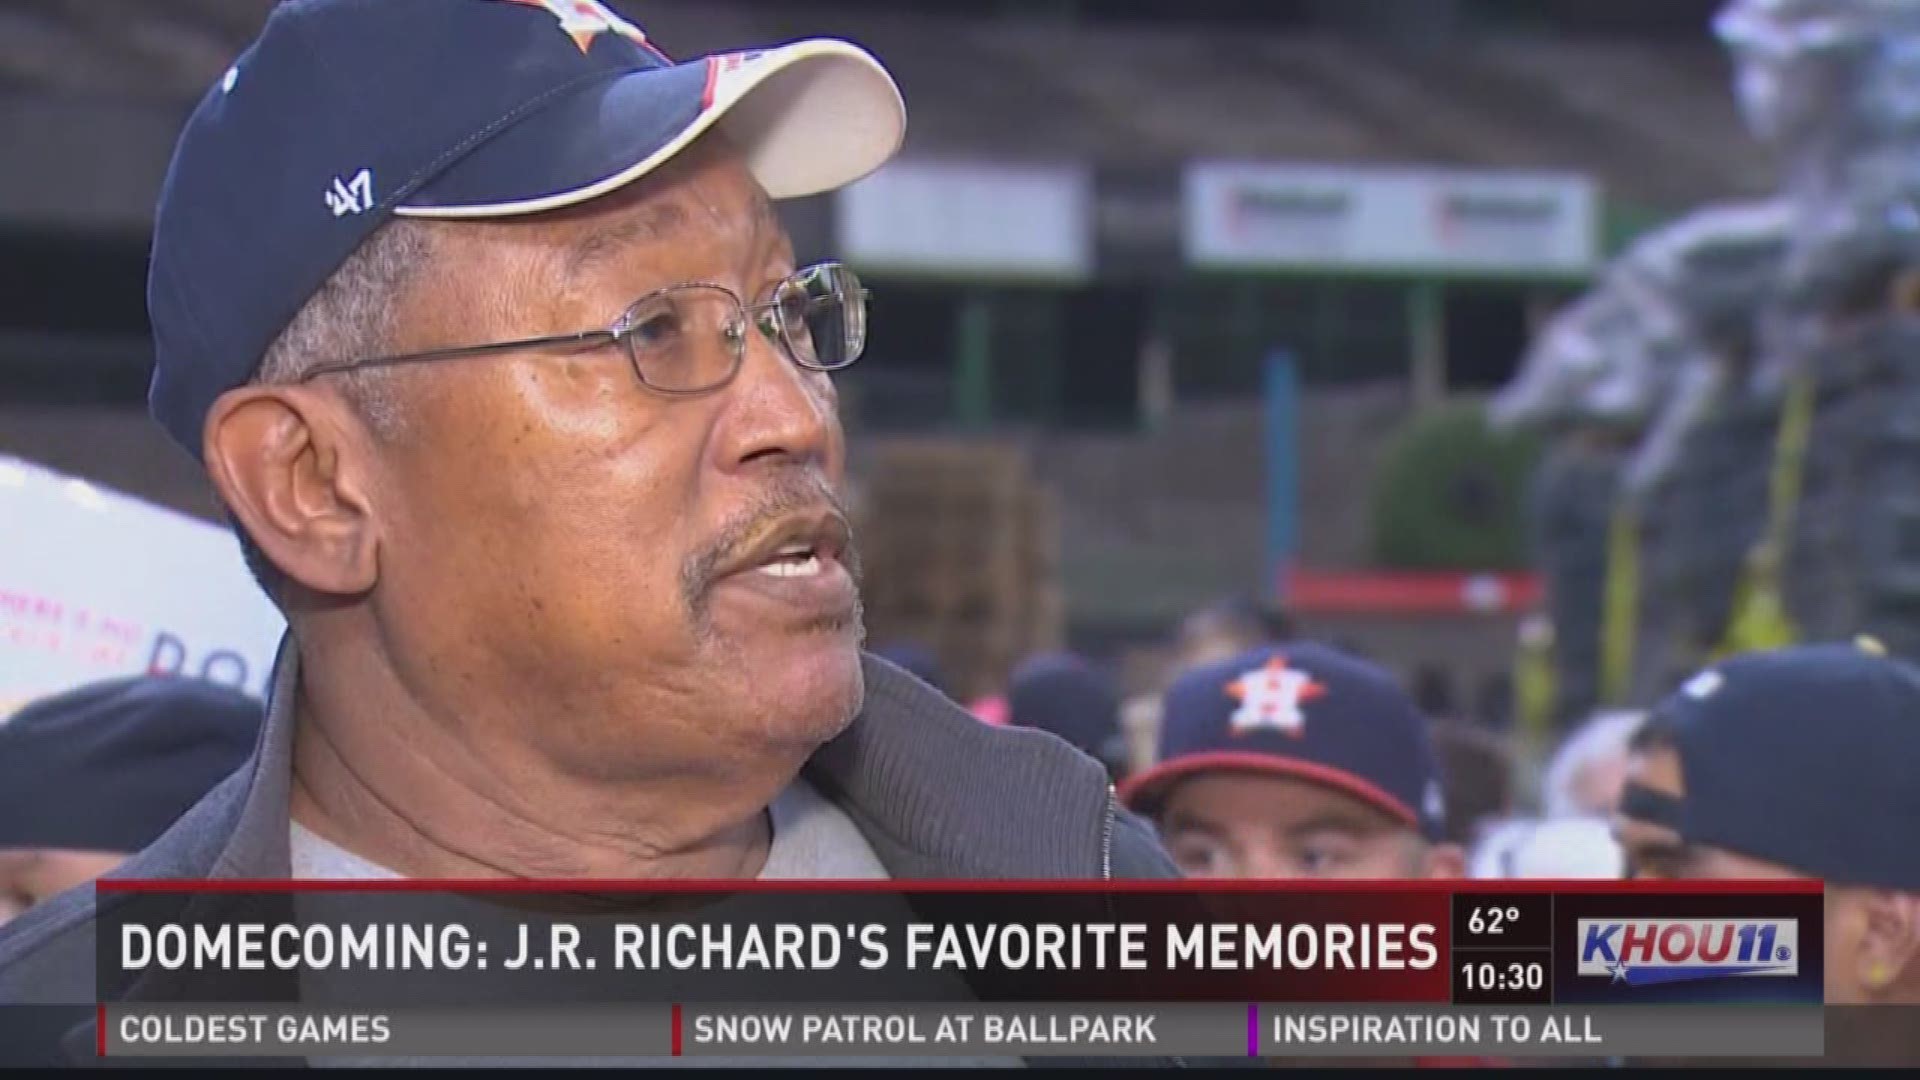 Former Astros pitcher J.R. Richard met fans Monday night during "Domecoming" at the Astrodome.